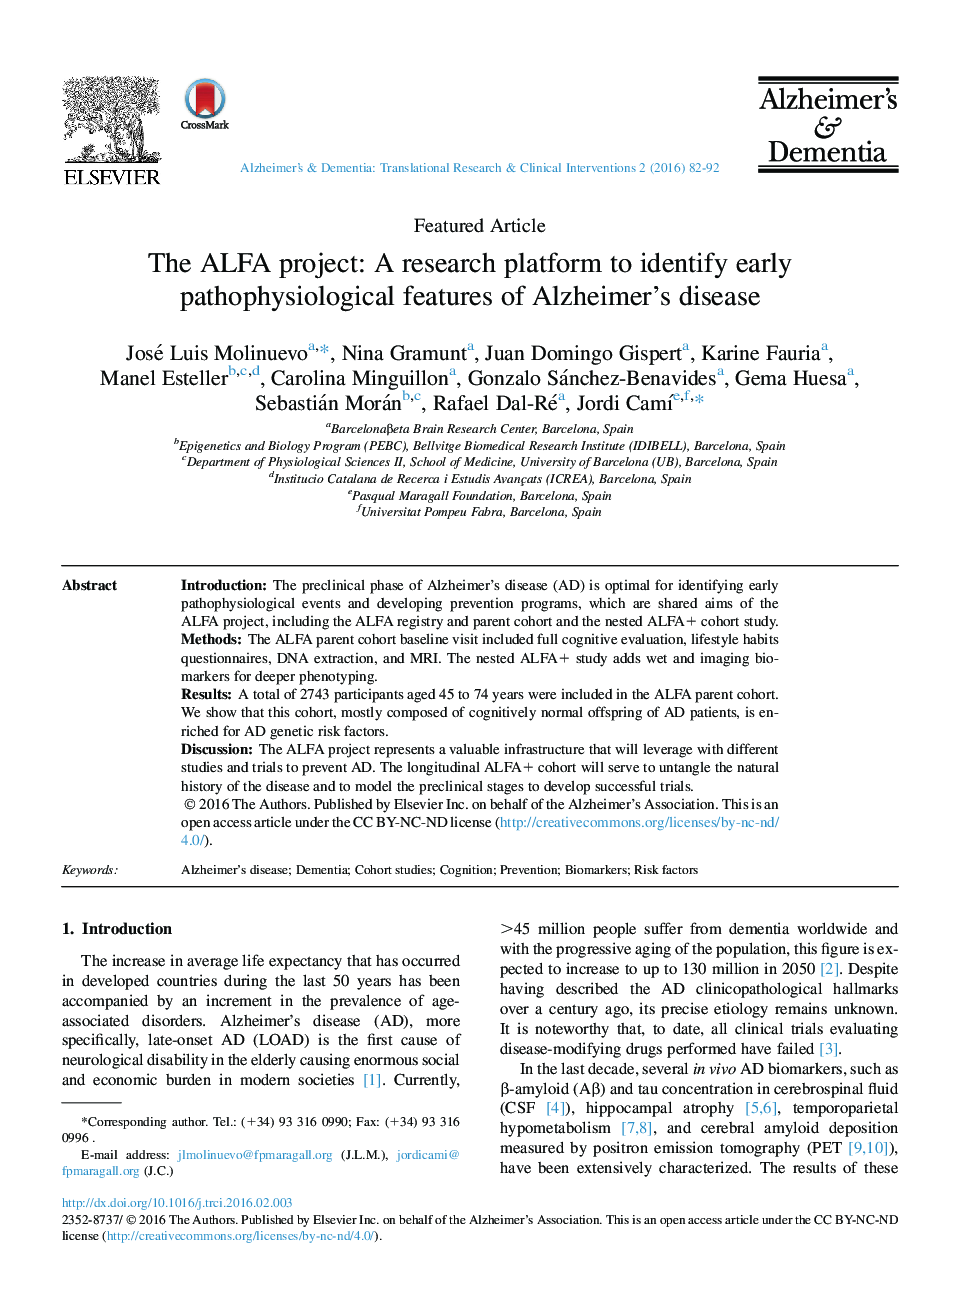 The ALFA project: A research platform to identify early pathophysiological features of Alzheimer's disease